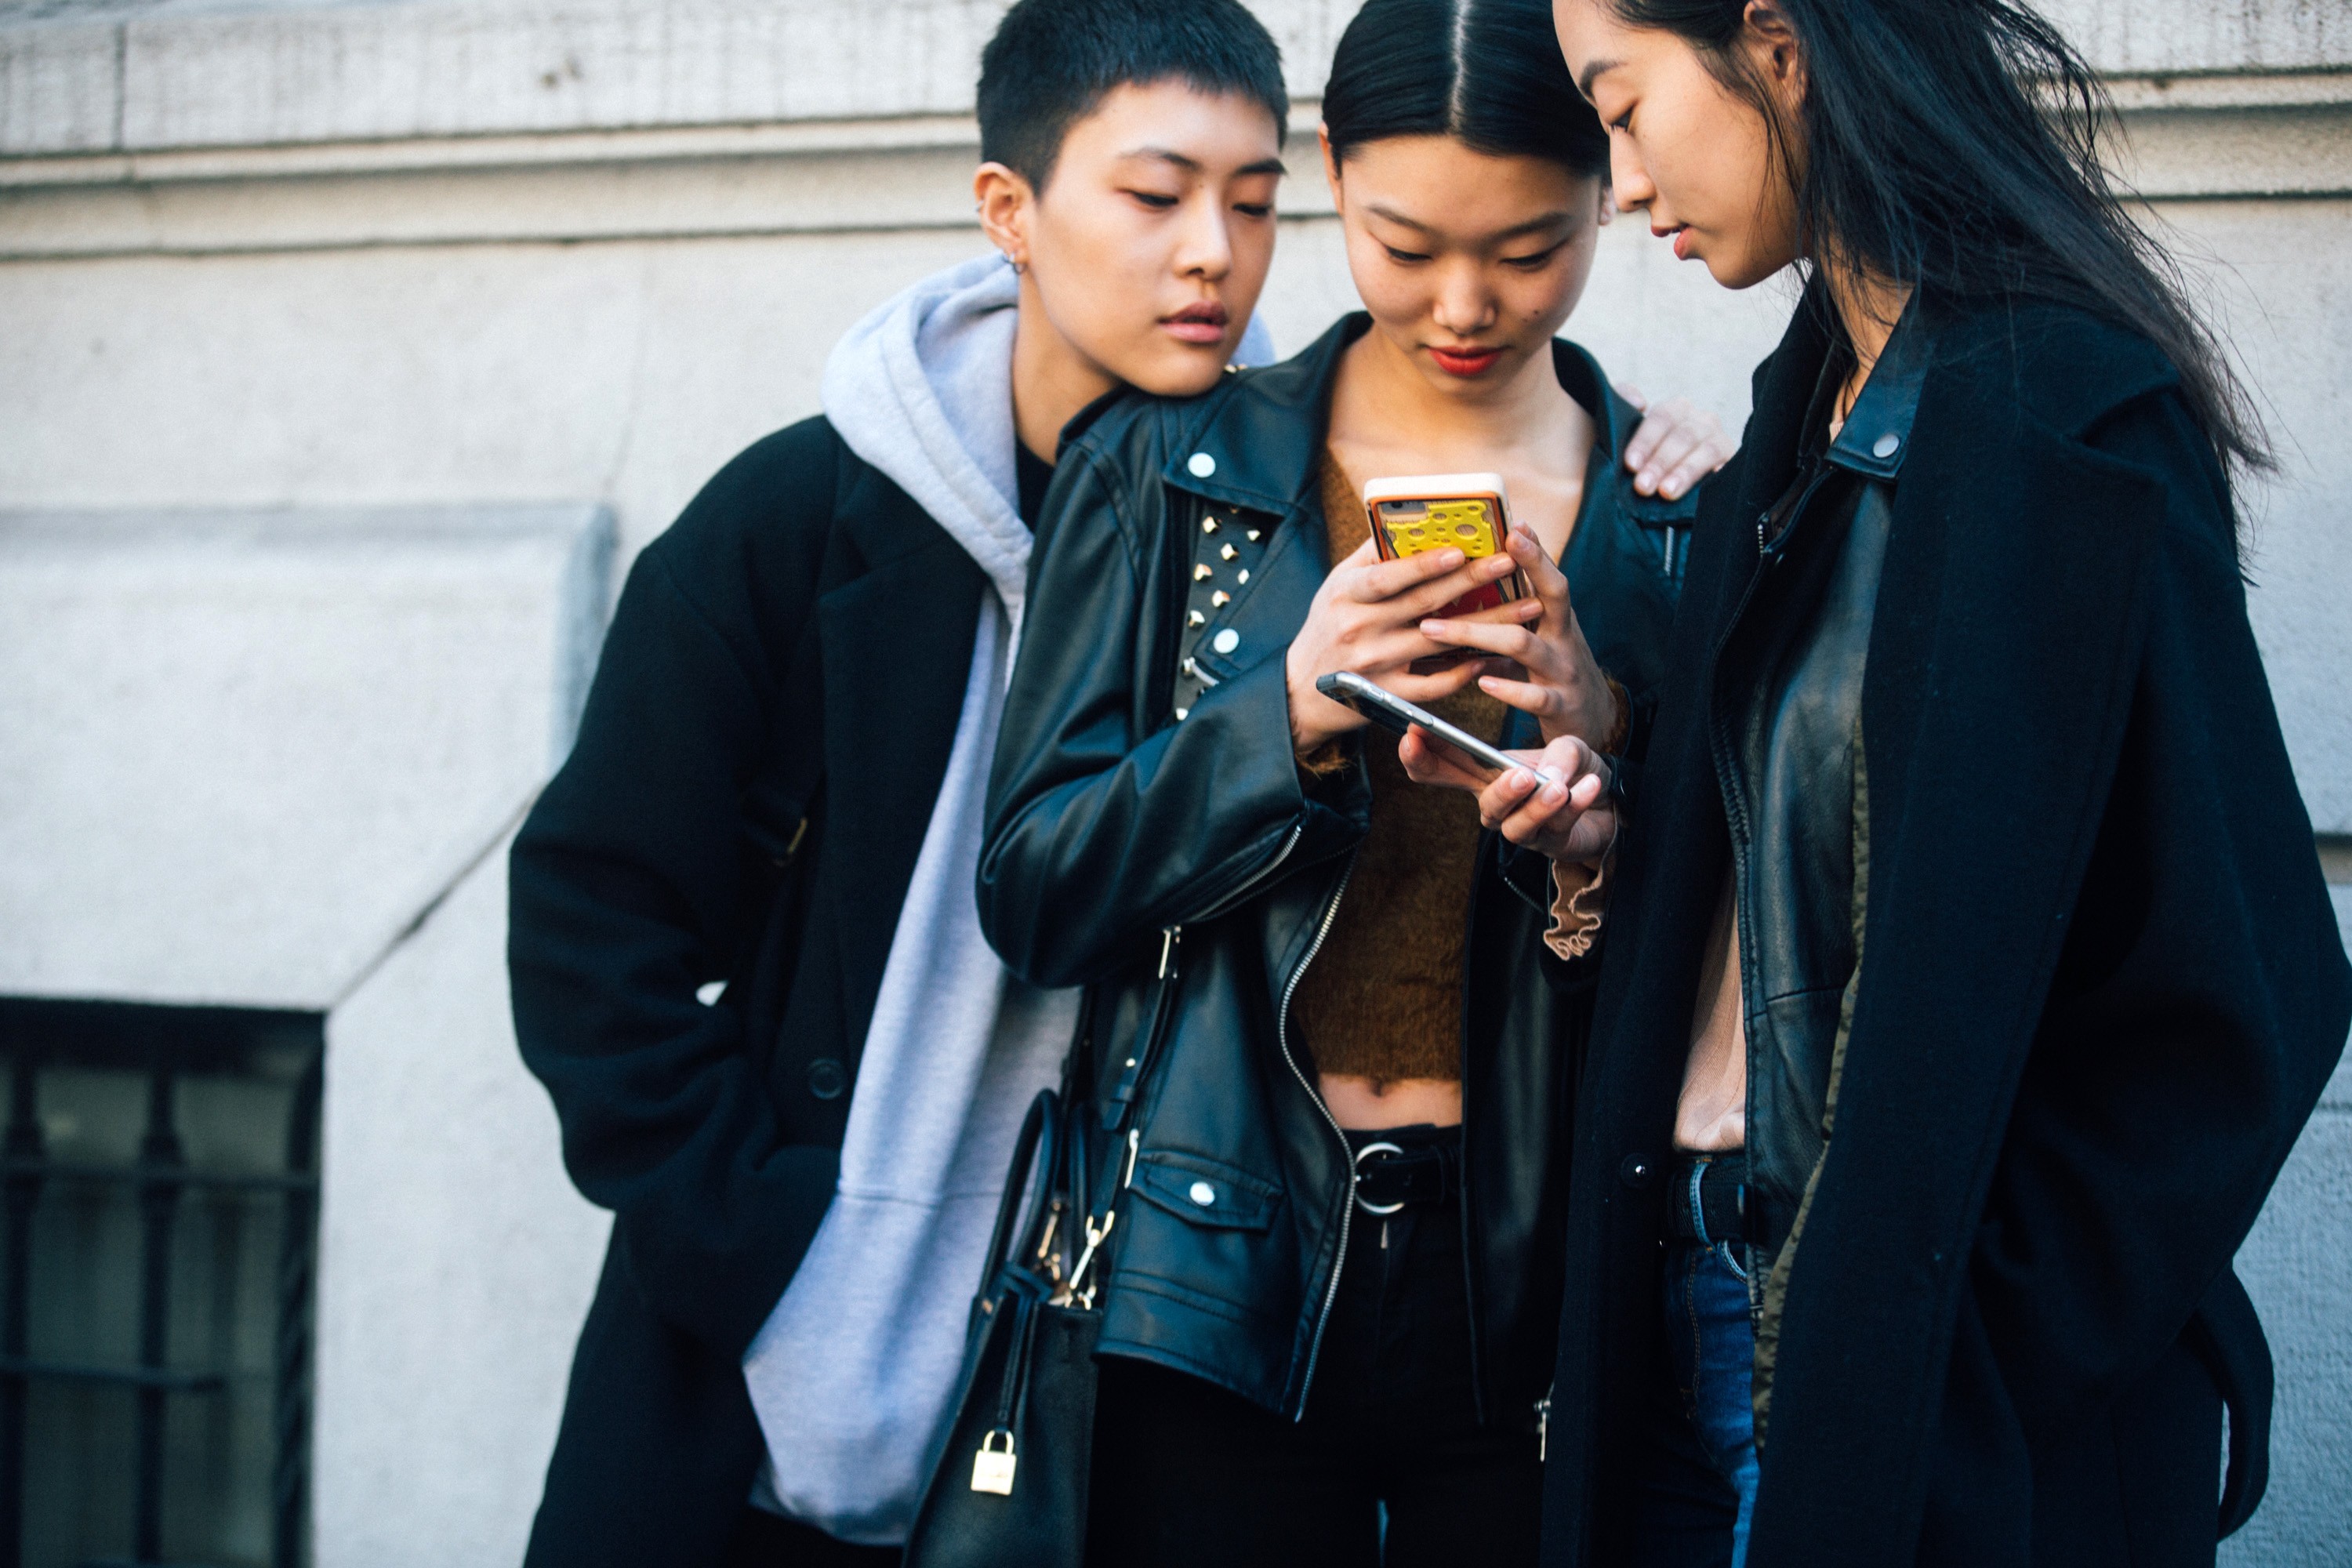 MILAN, ITALY - FEBRUARY 26: Korean models Sohyun Jung, Yoon Young Bae, Jiya Kwon chekc their phone after the Marni show during Milan Fashion Week Fall/Winter 2017/18 on February 26, 2017 in Milan, Italy. (Photo by Melodie Jeng/Getty Images) (Foto: Getty Images)